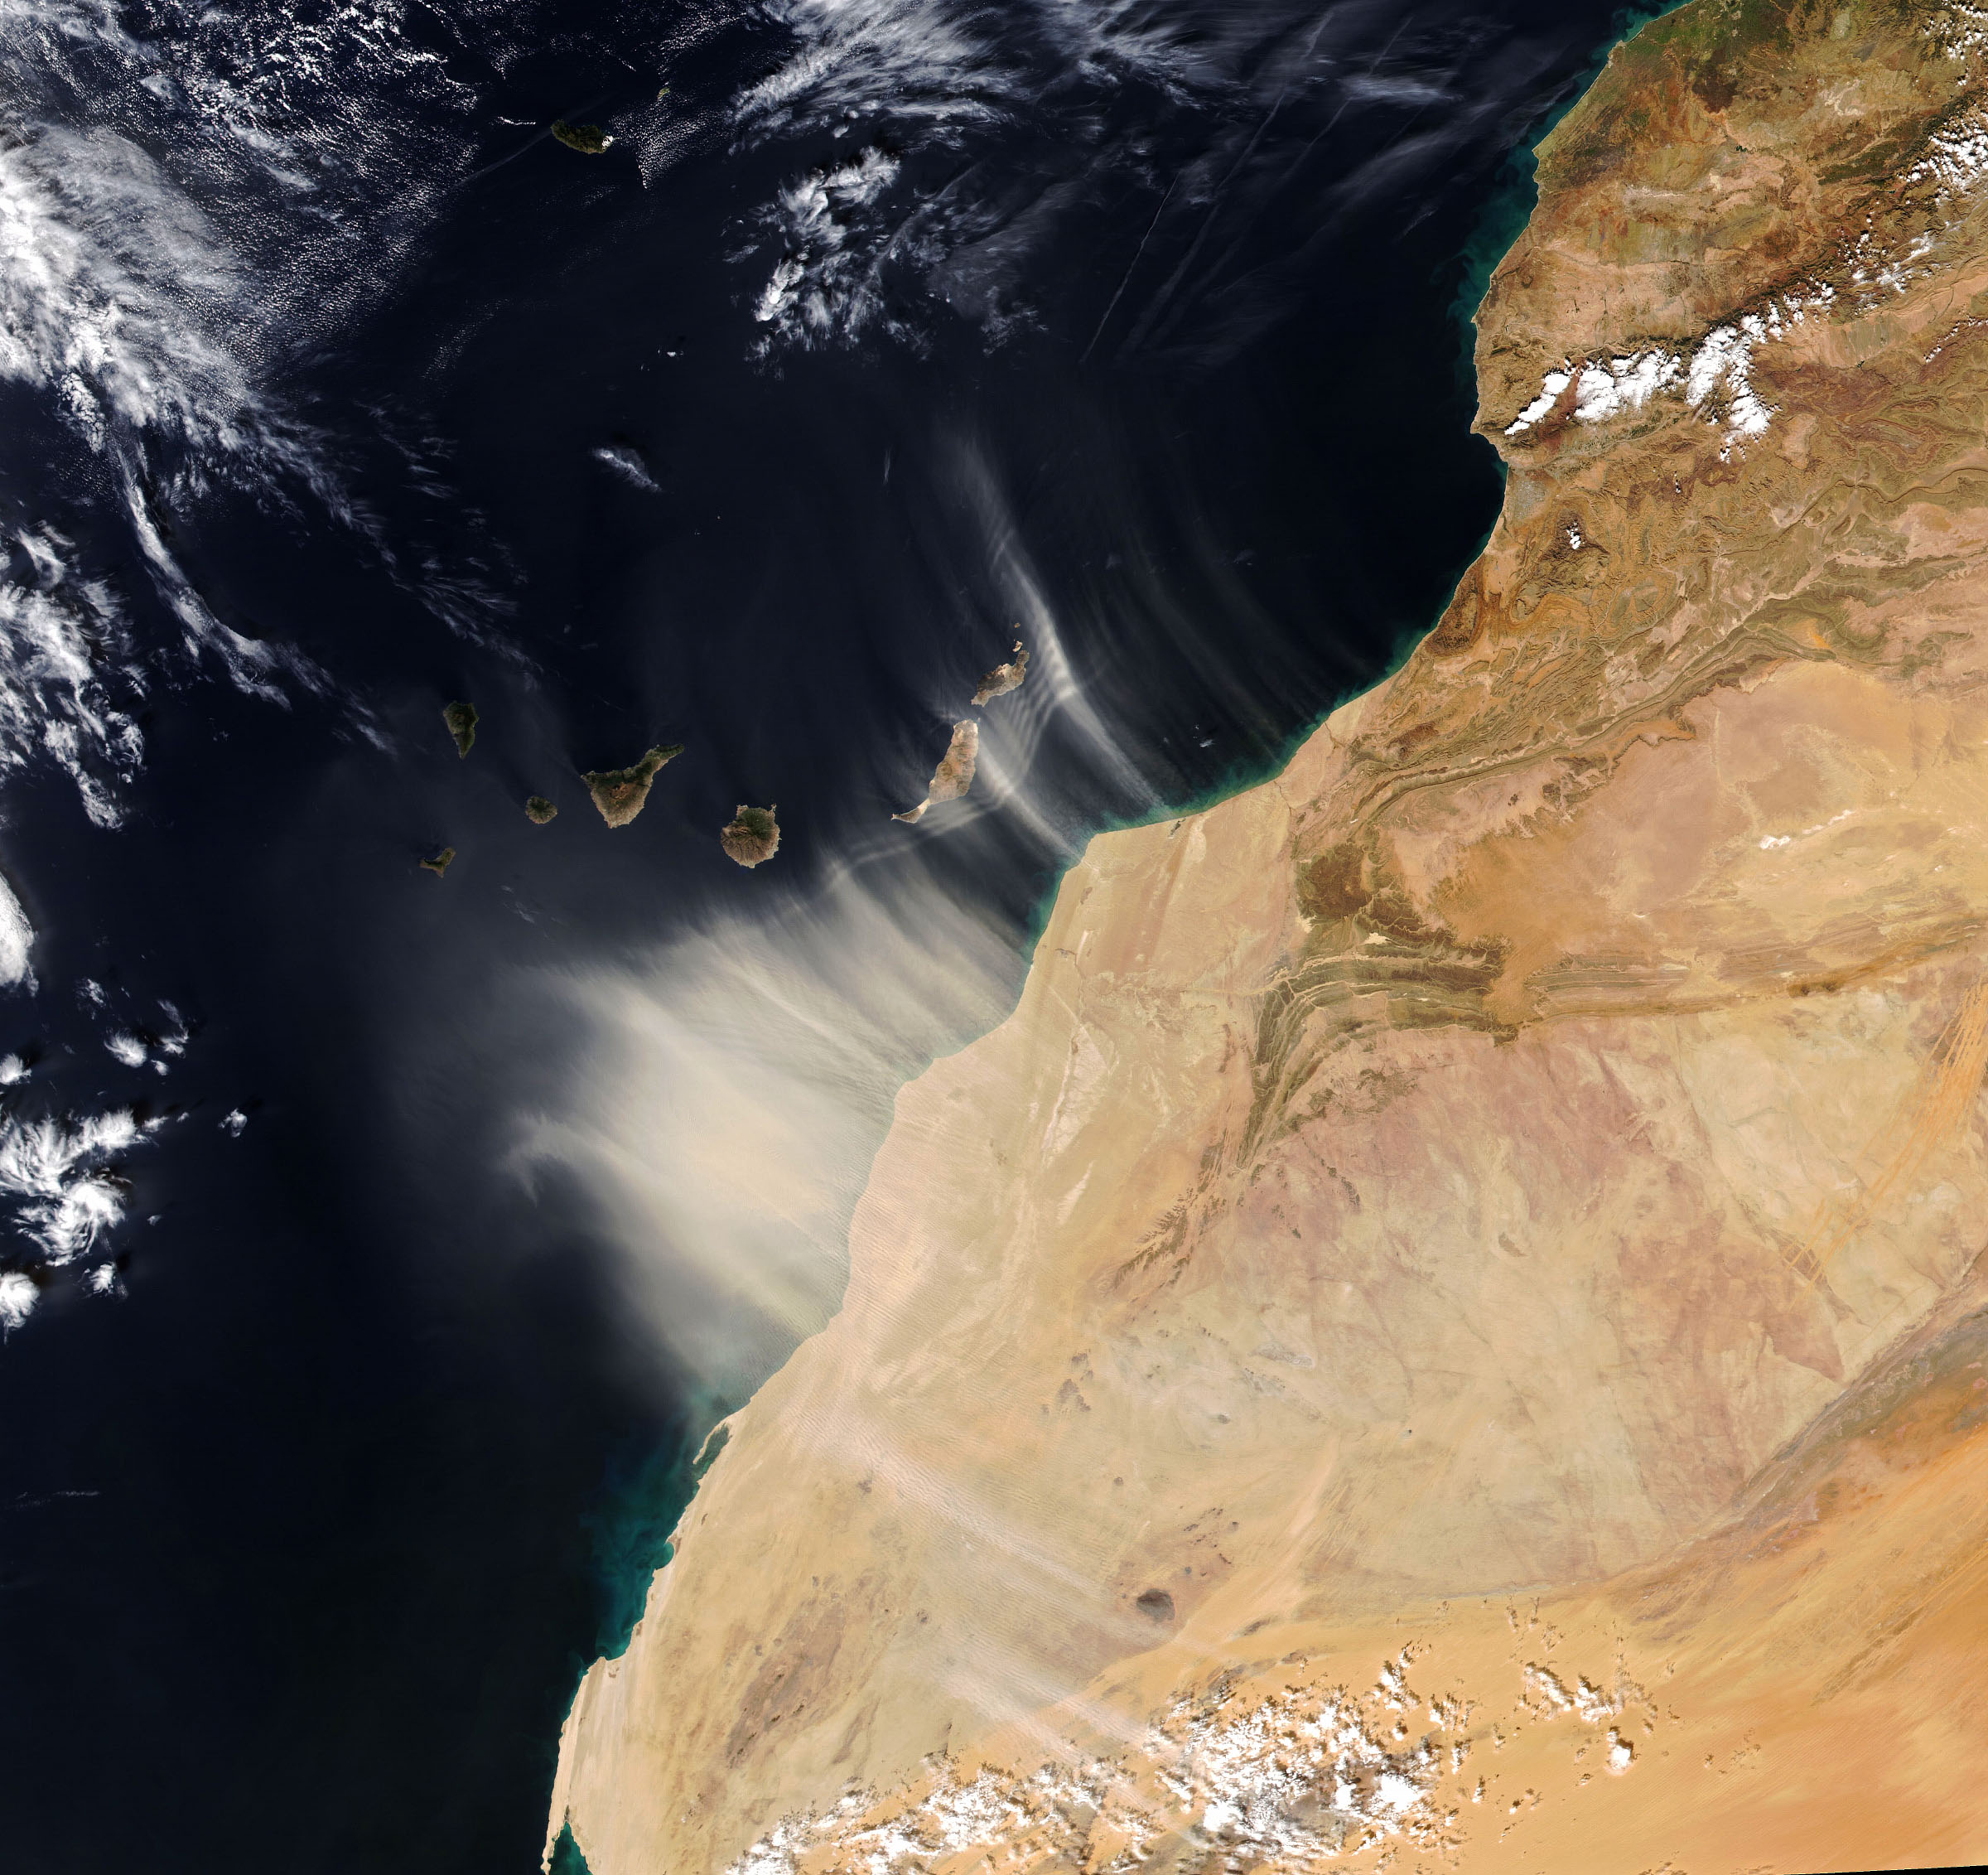 On Jan. 14, 2022, strong seasonal winds carried dust from northwest Africa over the Canary Islands, causing visibility to drop and air quality to decline. EMIT will measure the mineral composition of dust in Earth's arid regions, creating a map that could improve understanding of how dust affects people and communities.